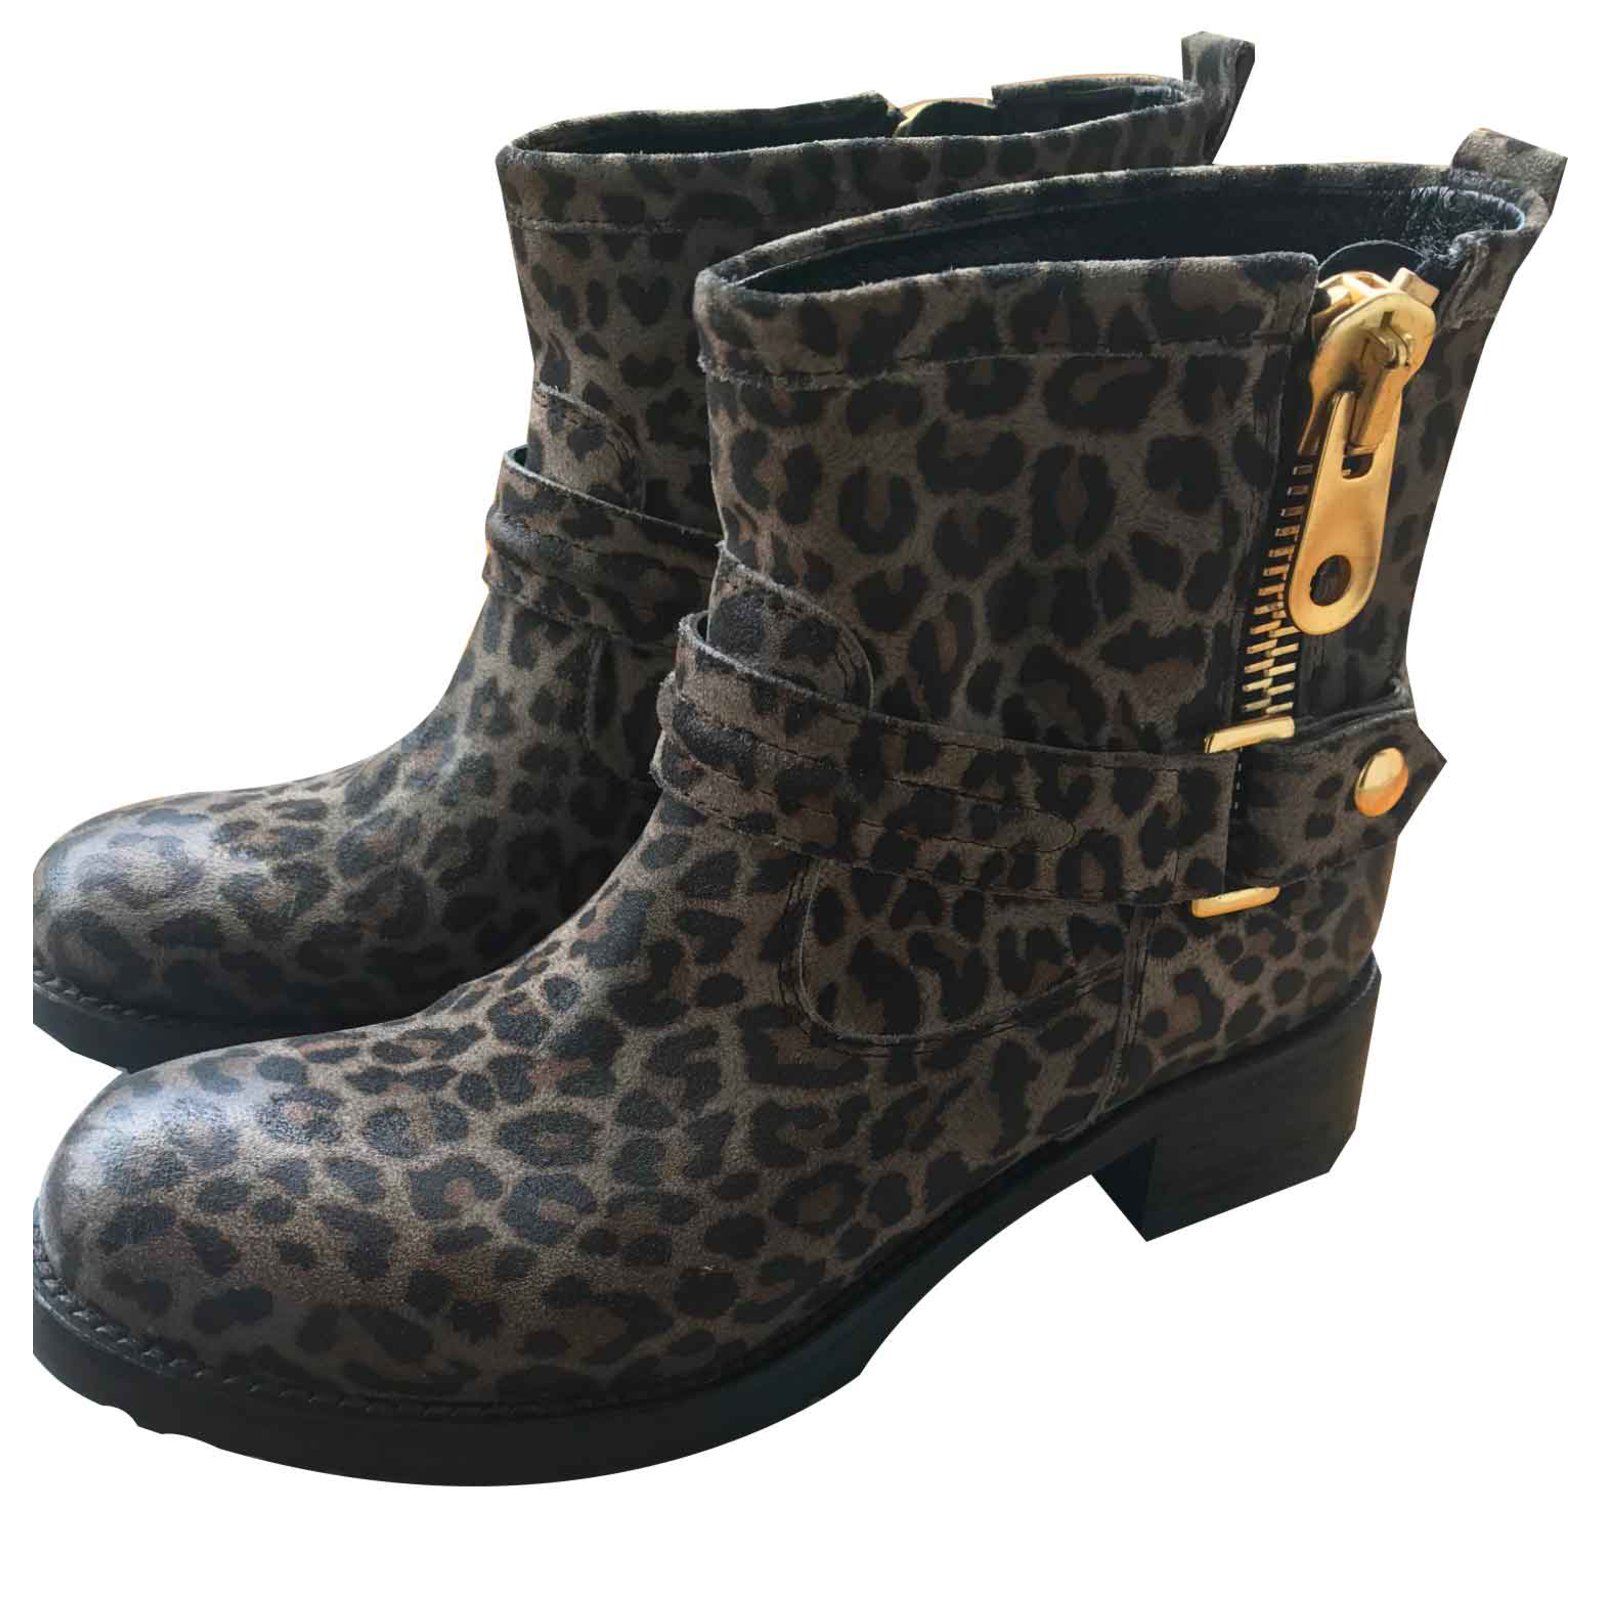 leopard print leather ankle boots